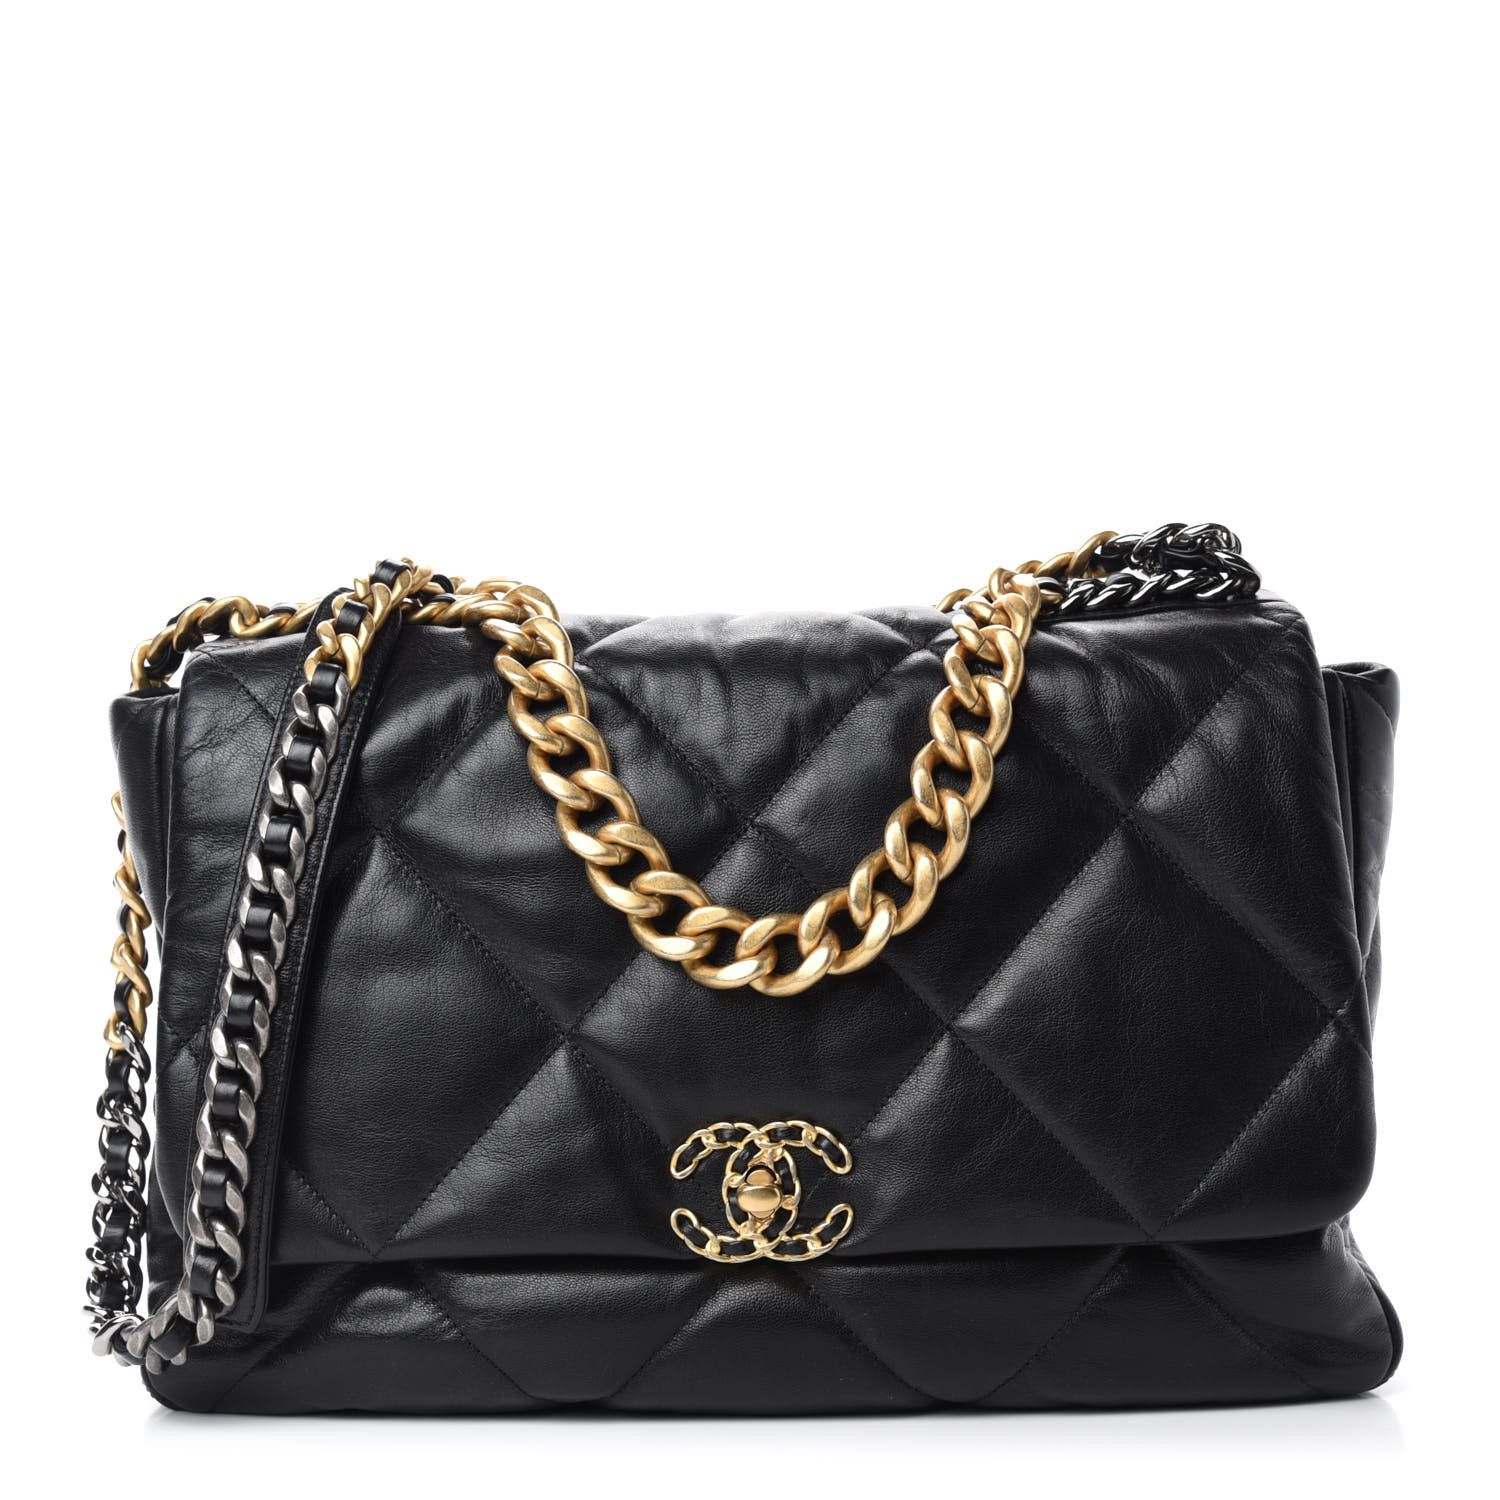 Goatskin Quilted Maxi Chanel 19 Flap Black | Fashionphile